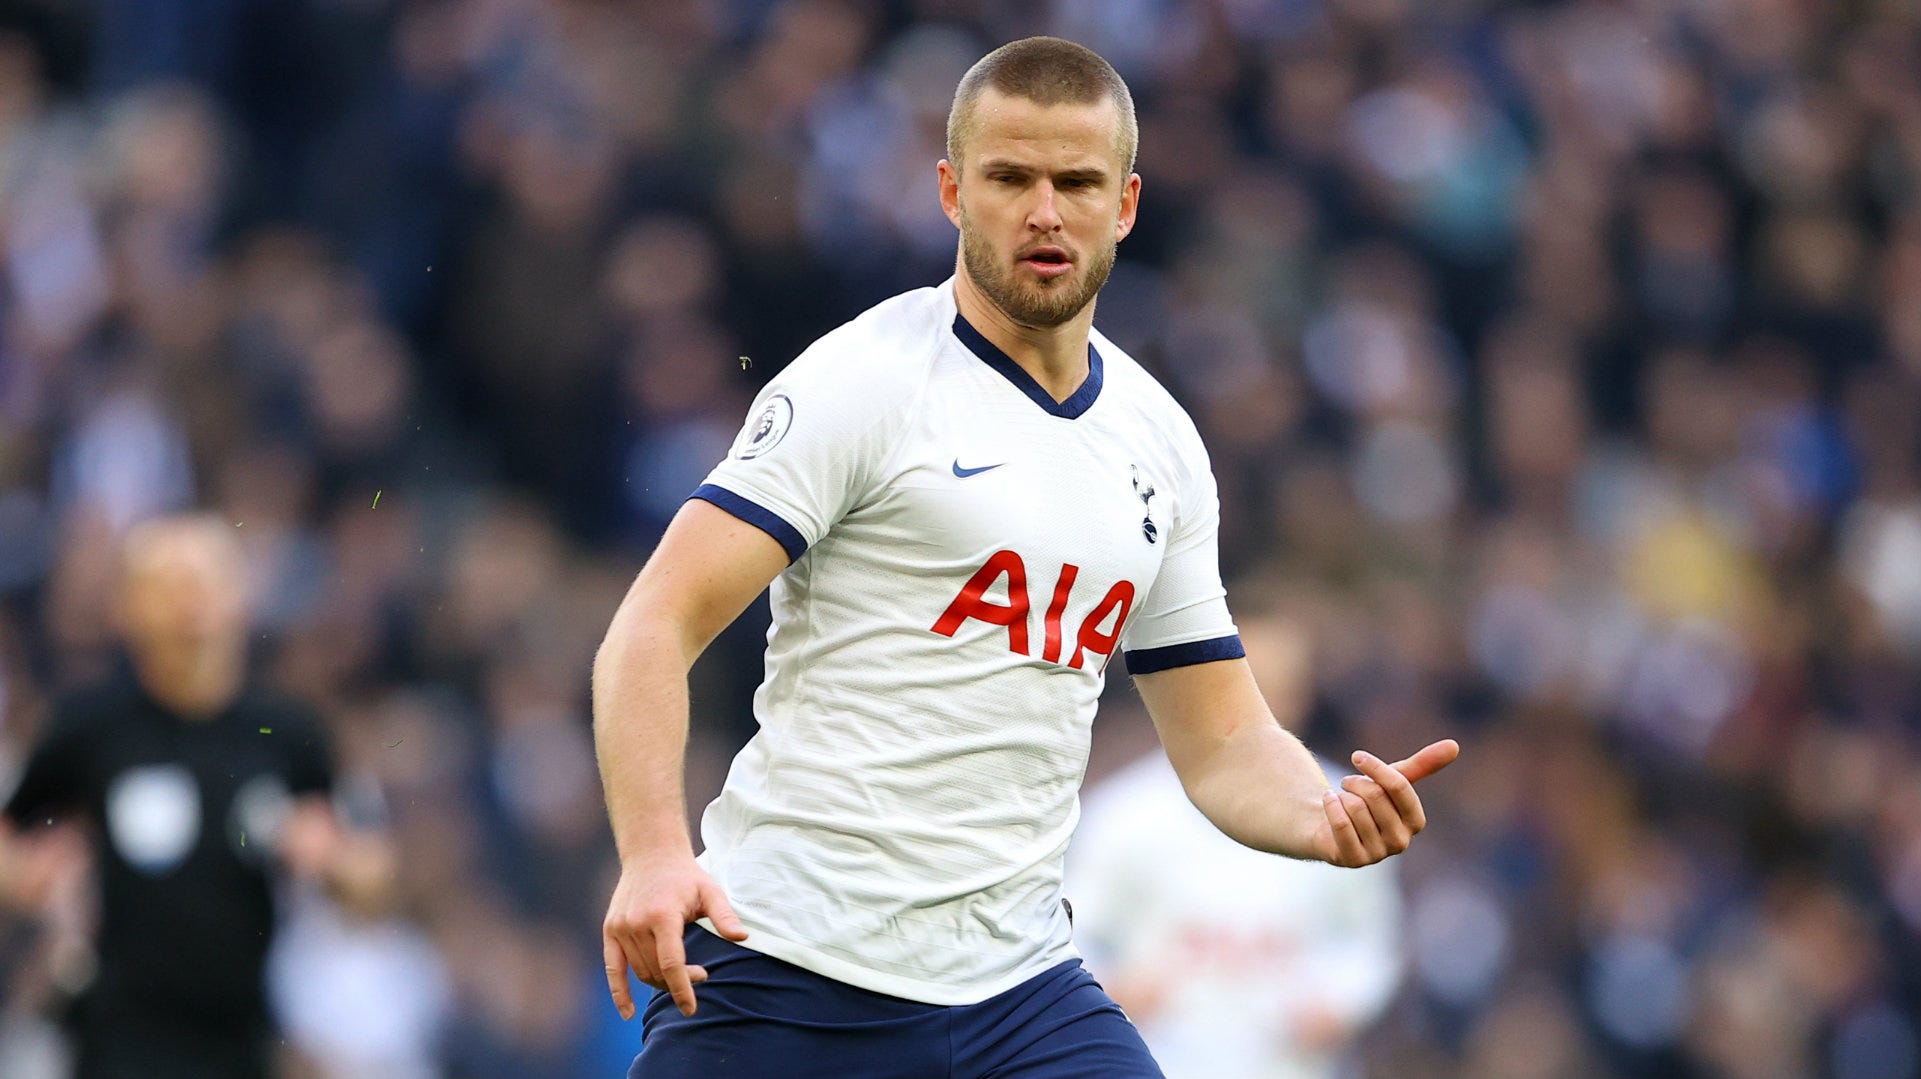 Tottenham's Dier: Centre-back is where I see my future | Goal.com